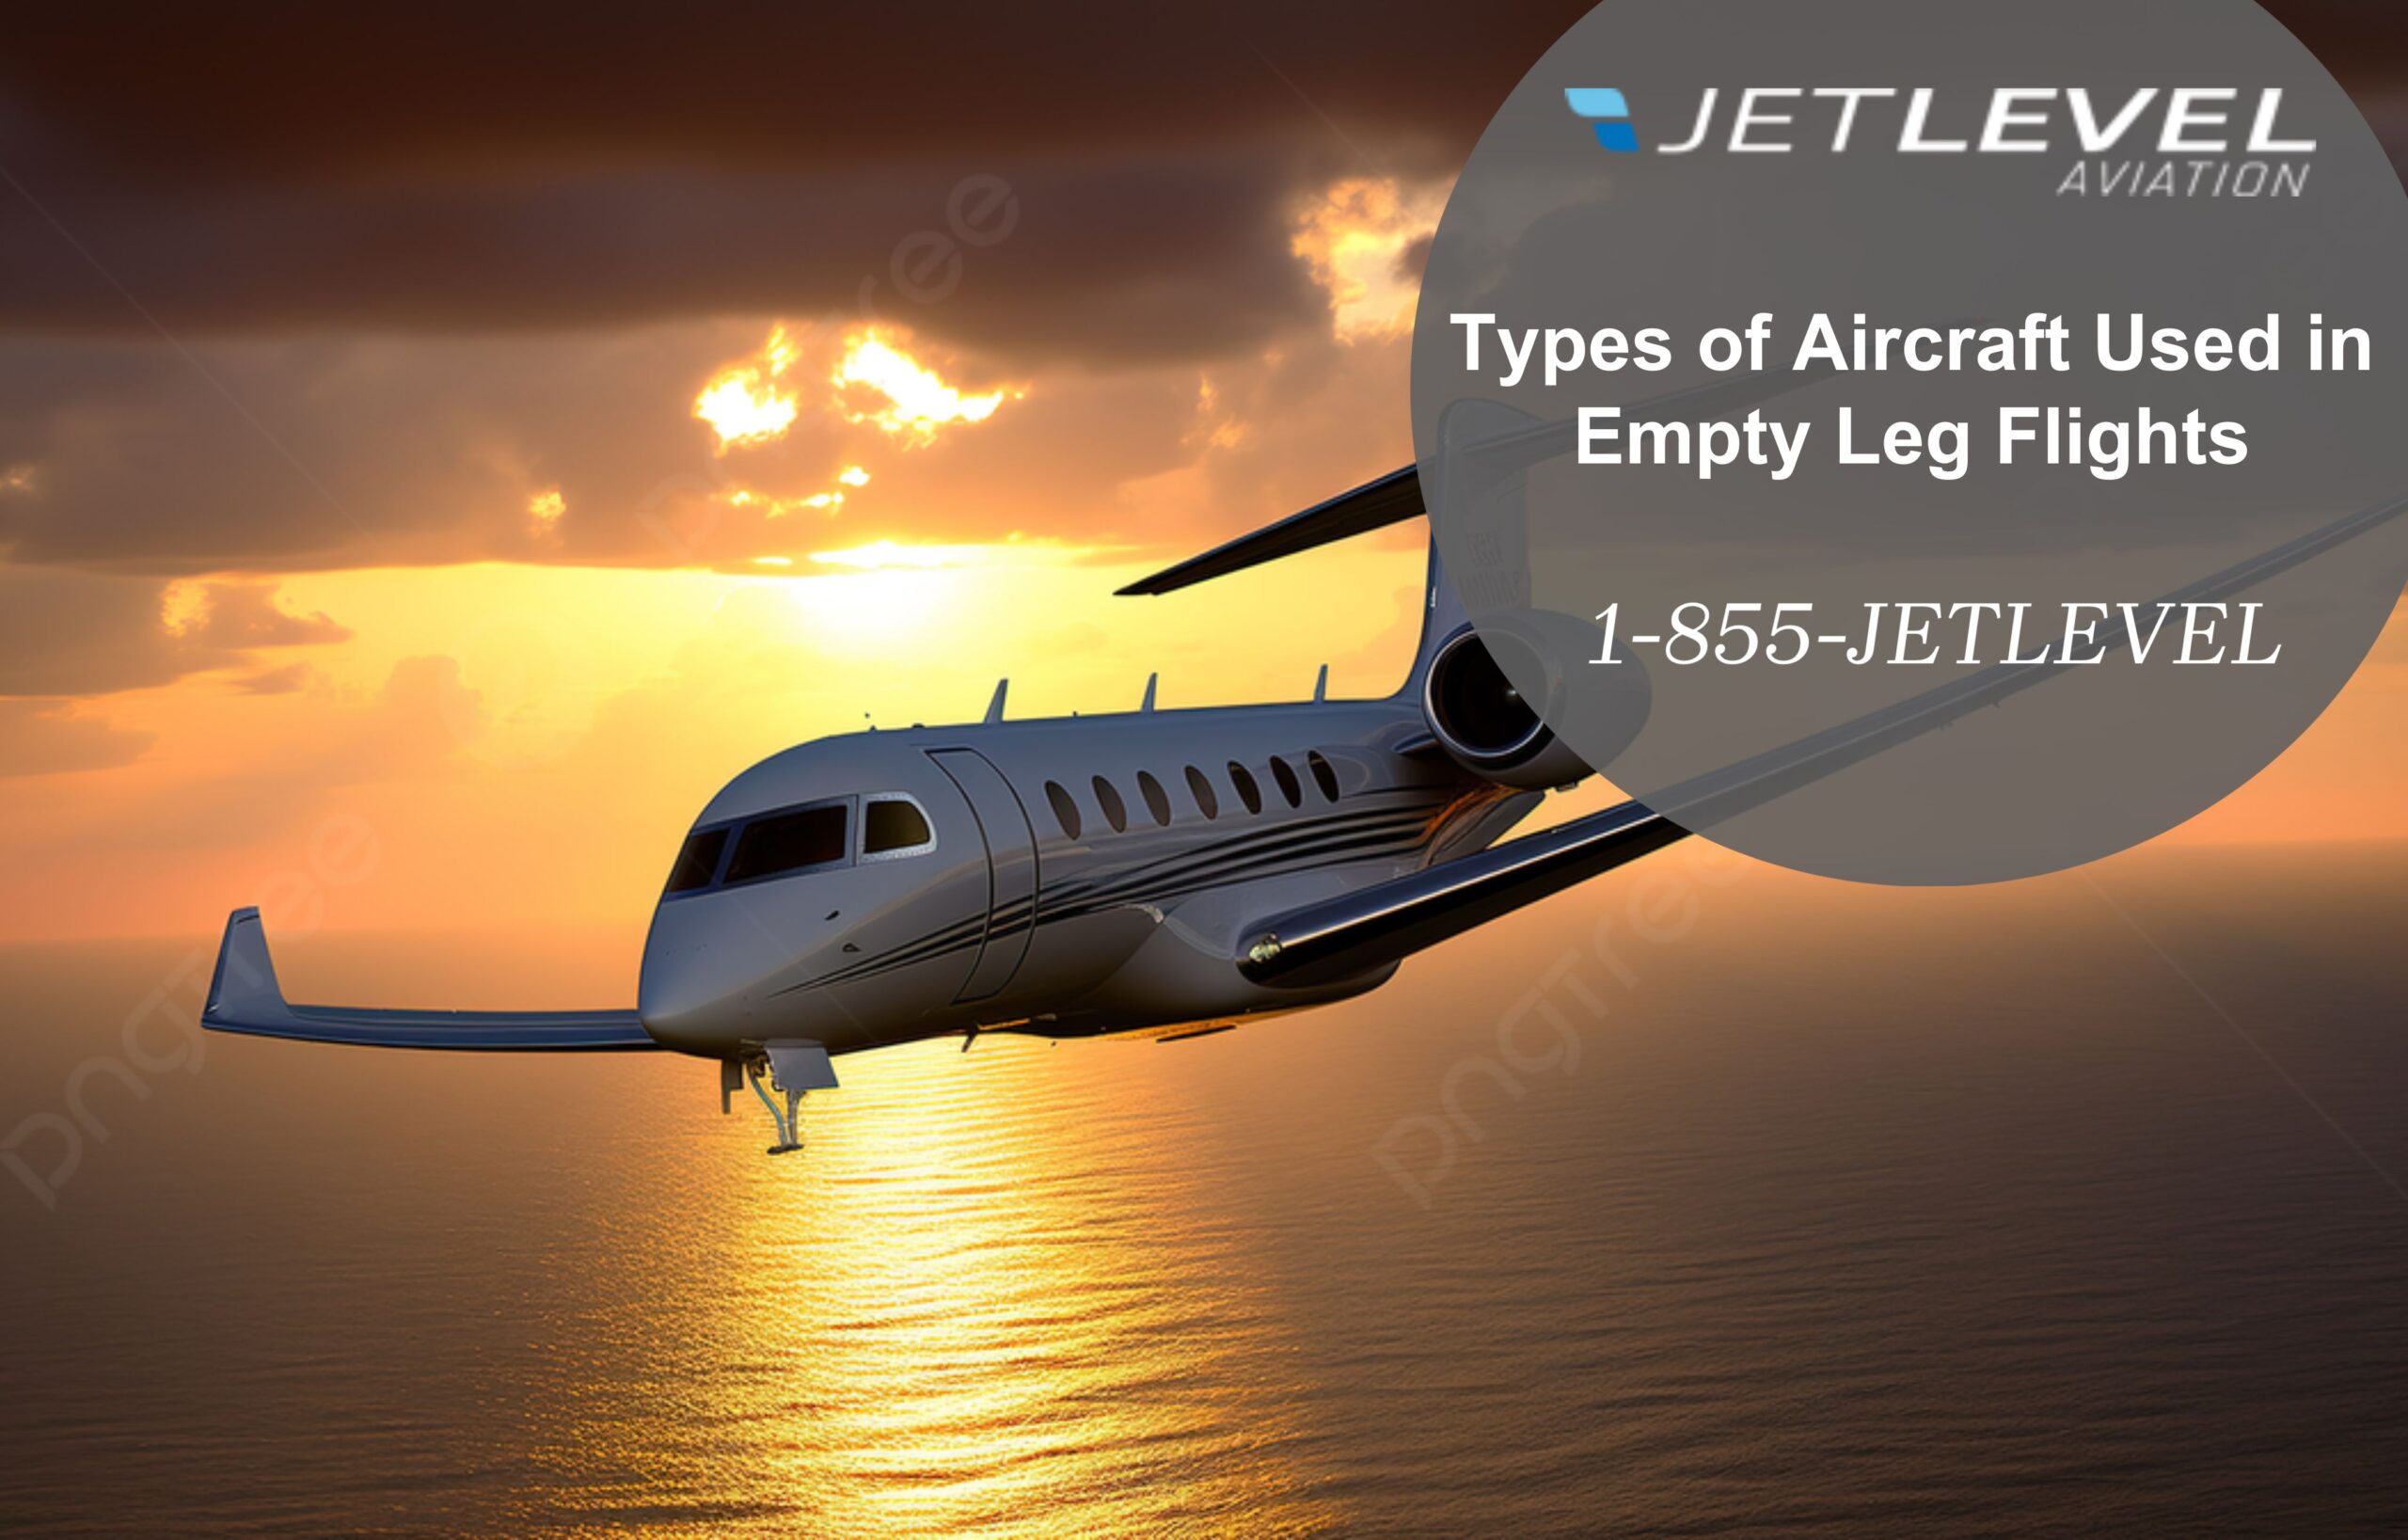 Types of Aircraft Used in Empty Leg Flights